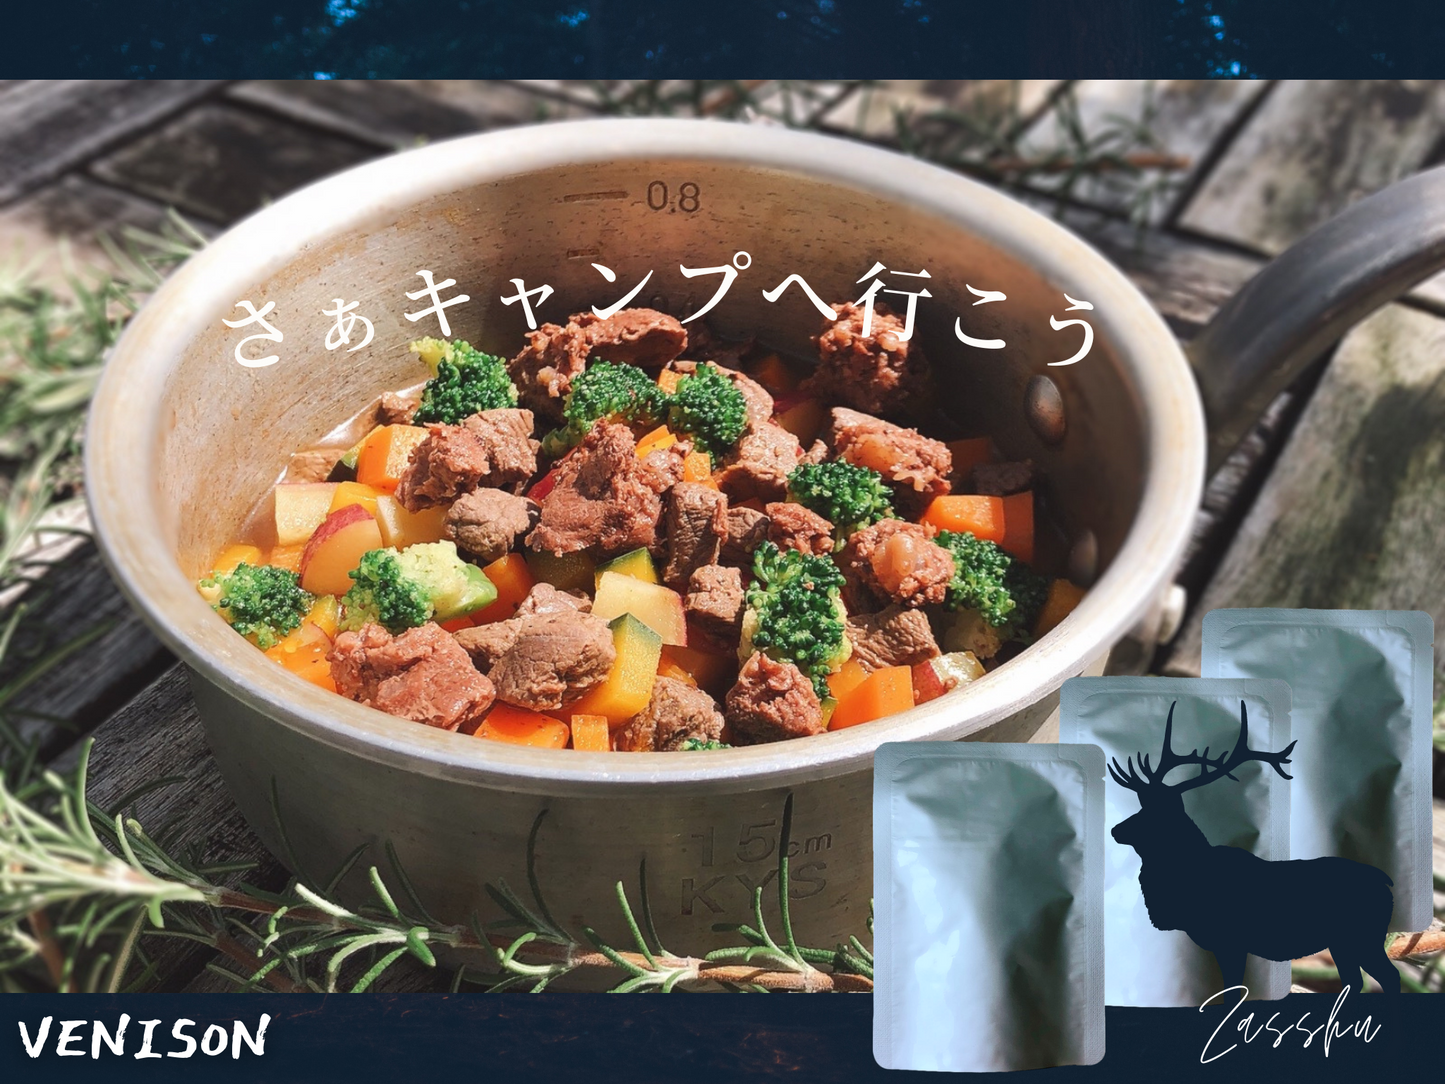 Domestic additive-free, water-free, long-term storage, retort pouch, disaster prevention, outdoor emergency food [retort venison, venison and vegetables] 